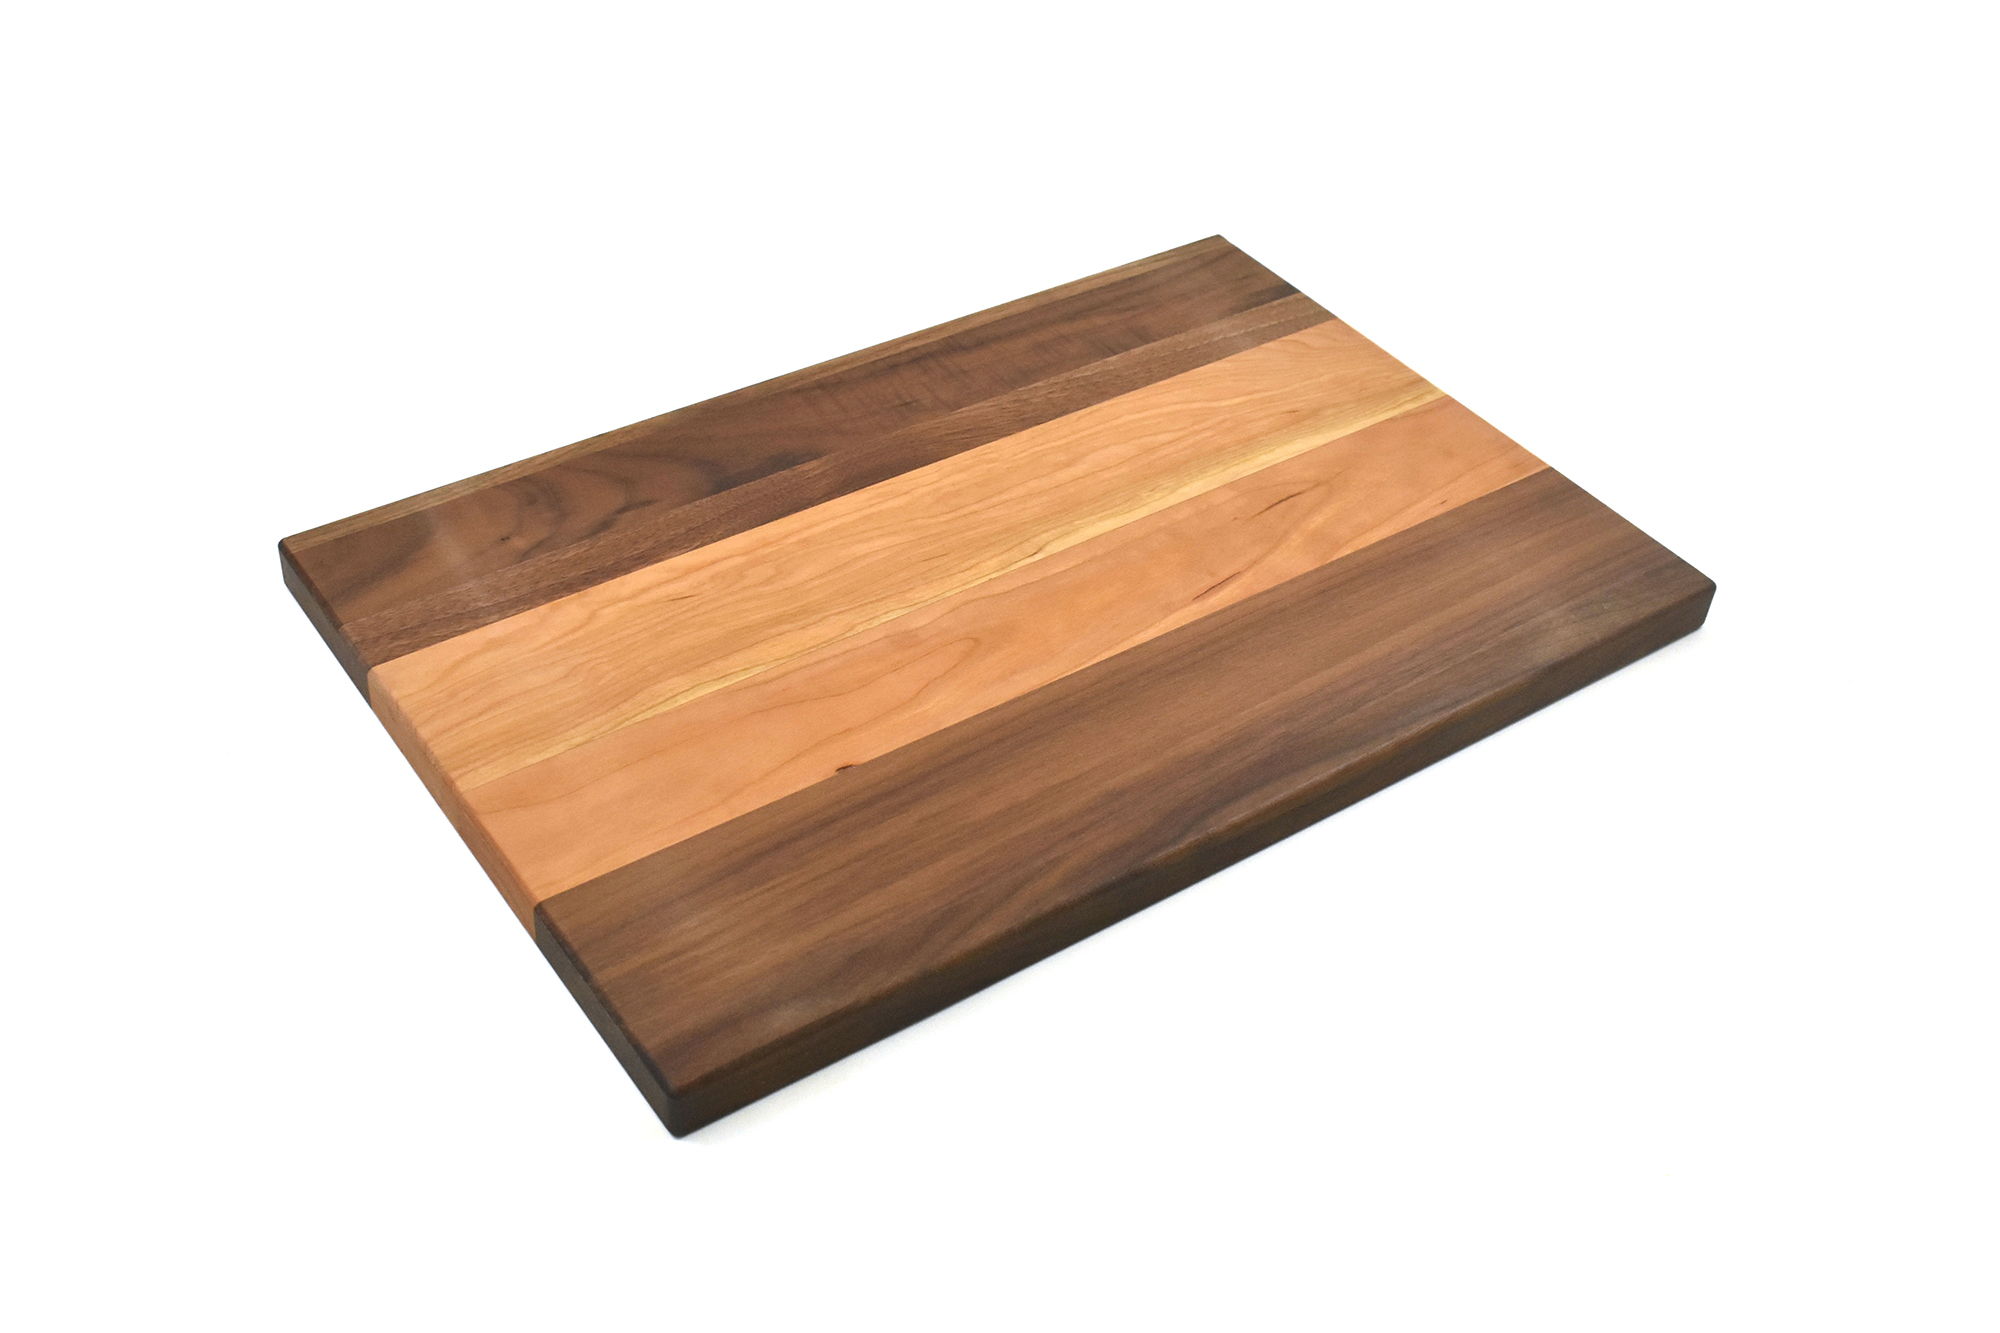 Multi wood species cutting board - Walnut wood ends with Cherry wood in the middle